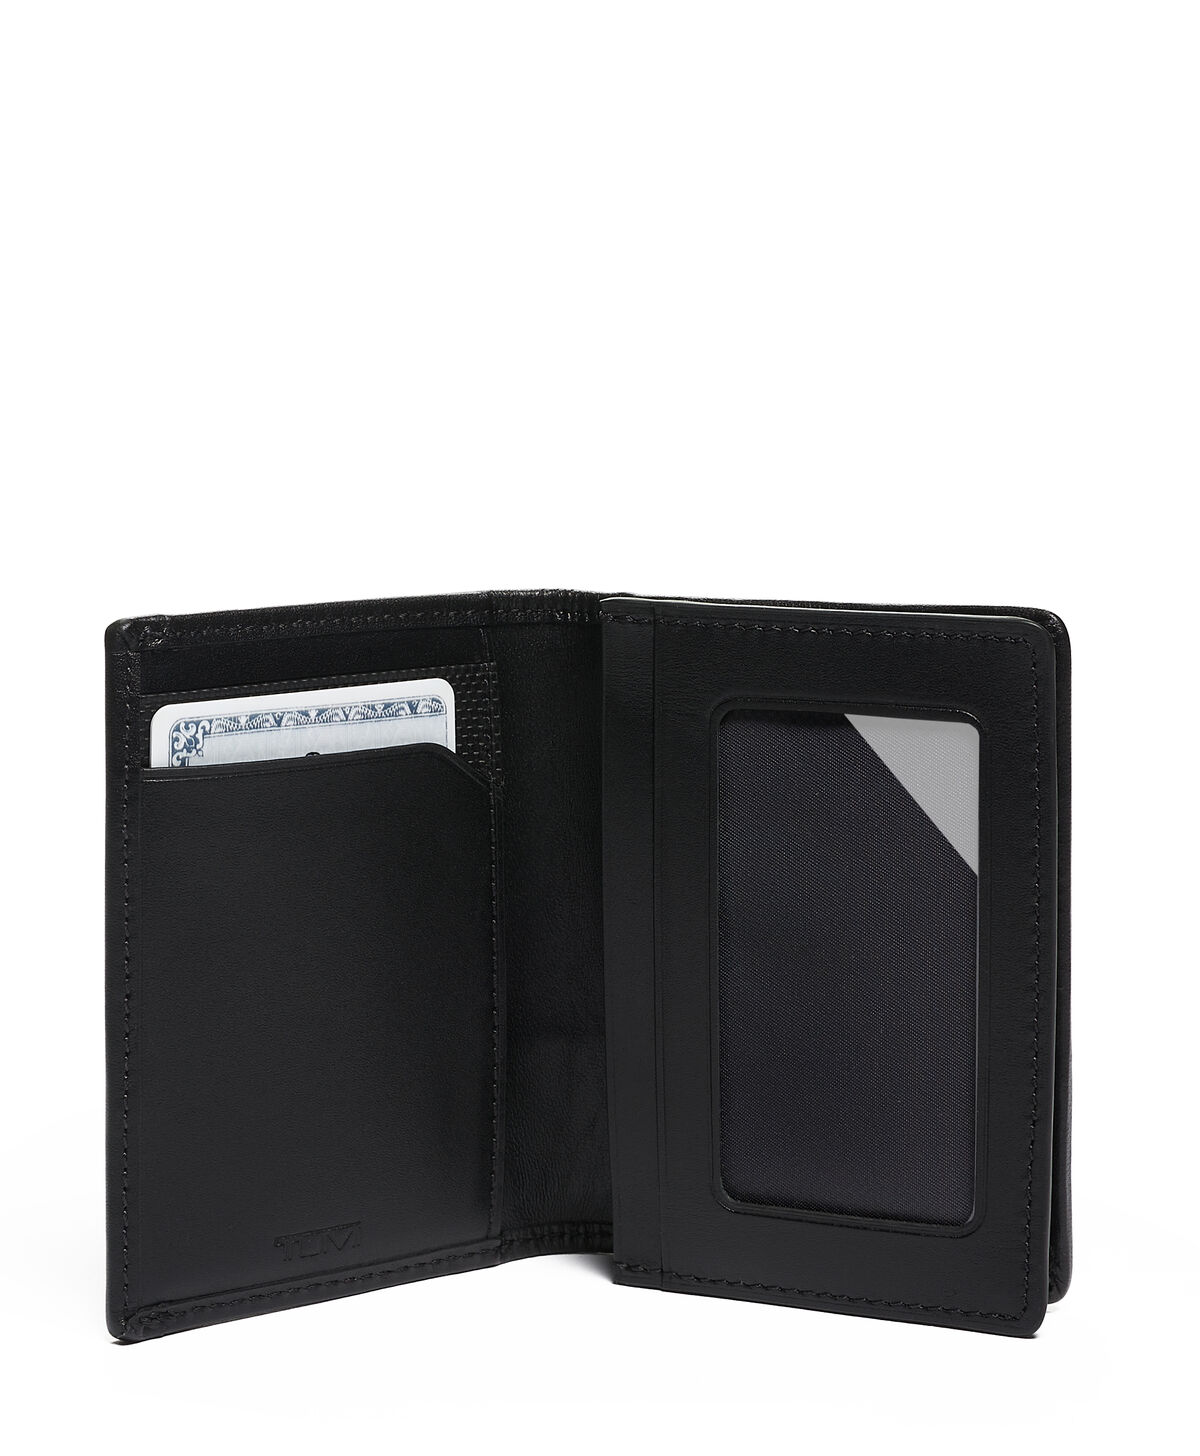 Tumi Alpha GUSSETED CARD CASE  Black